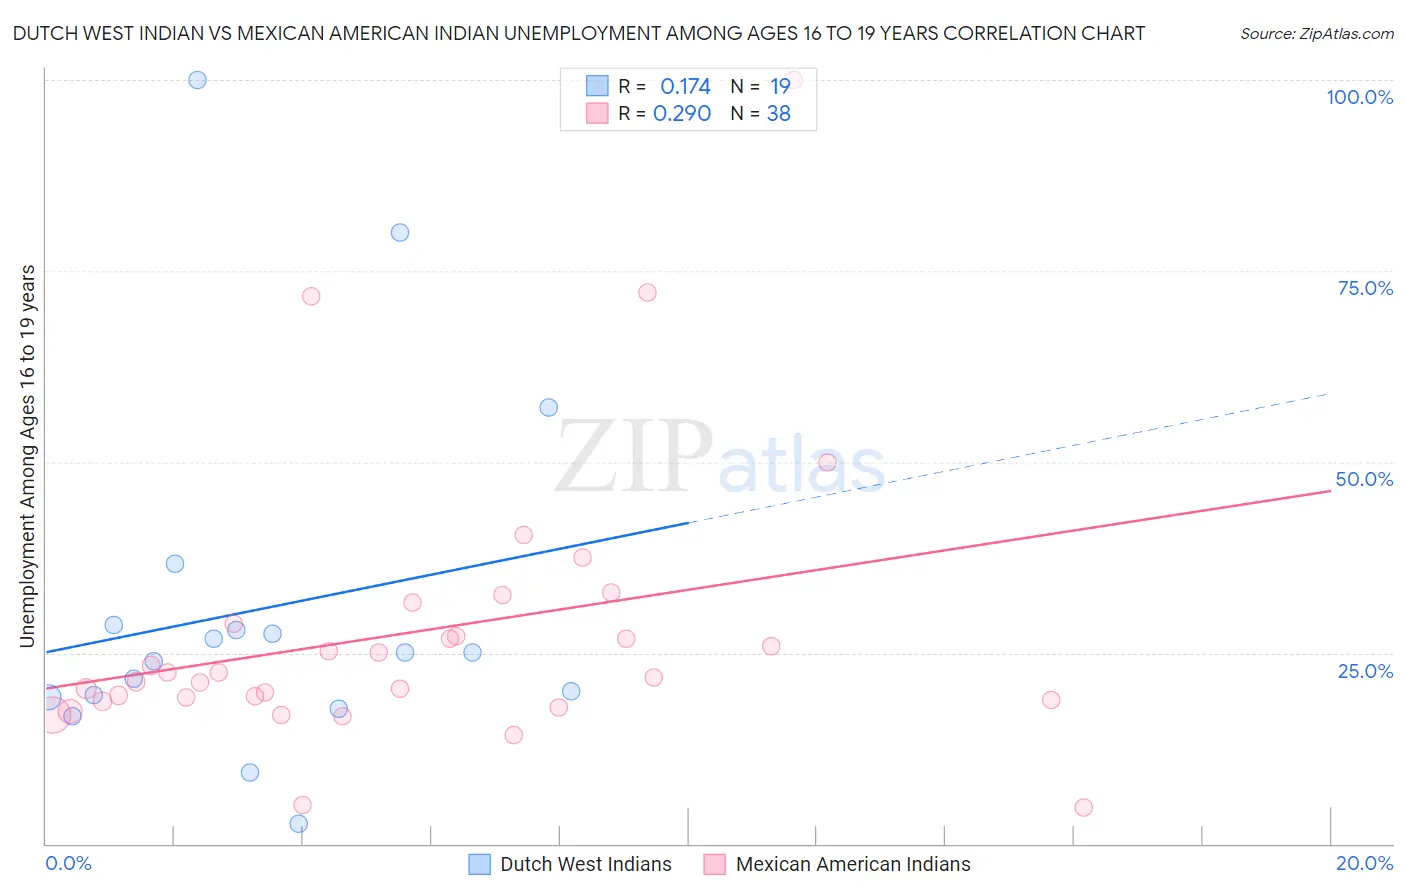 Dutch West Indian vs Mexican American Indian Unemployment Among Ages 16 to 19 years